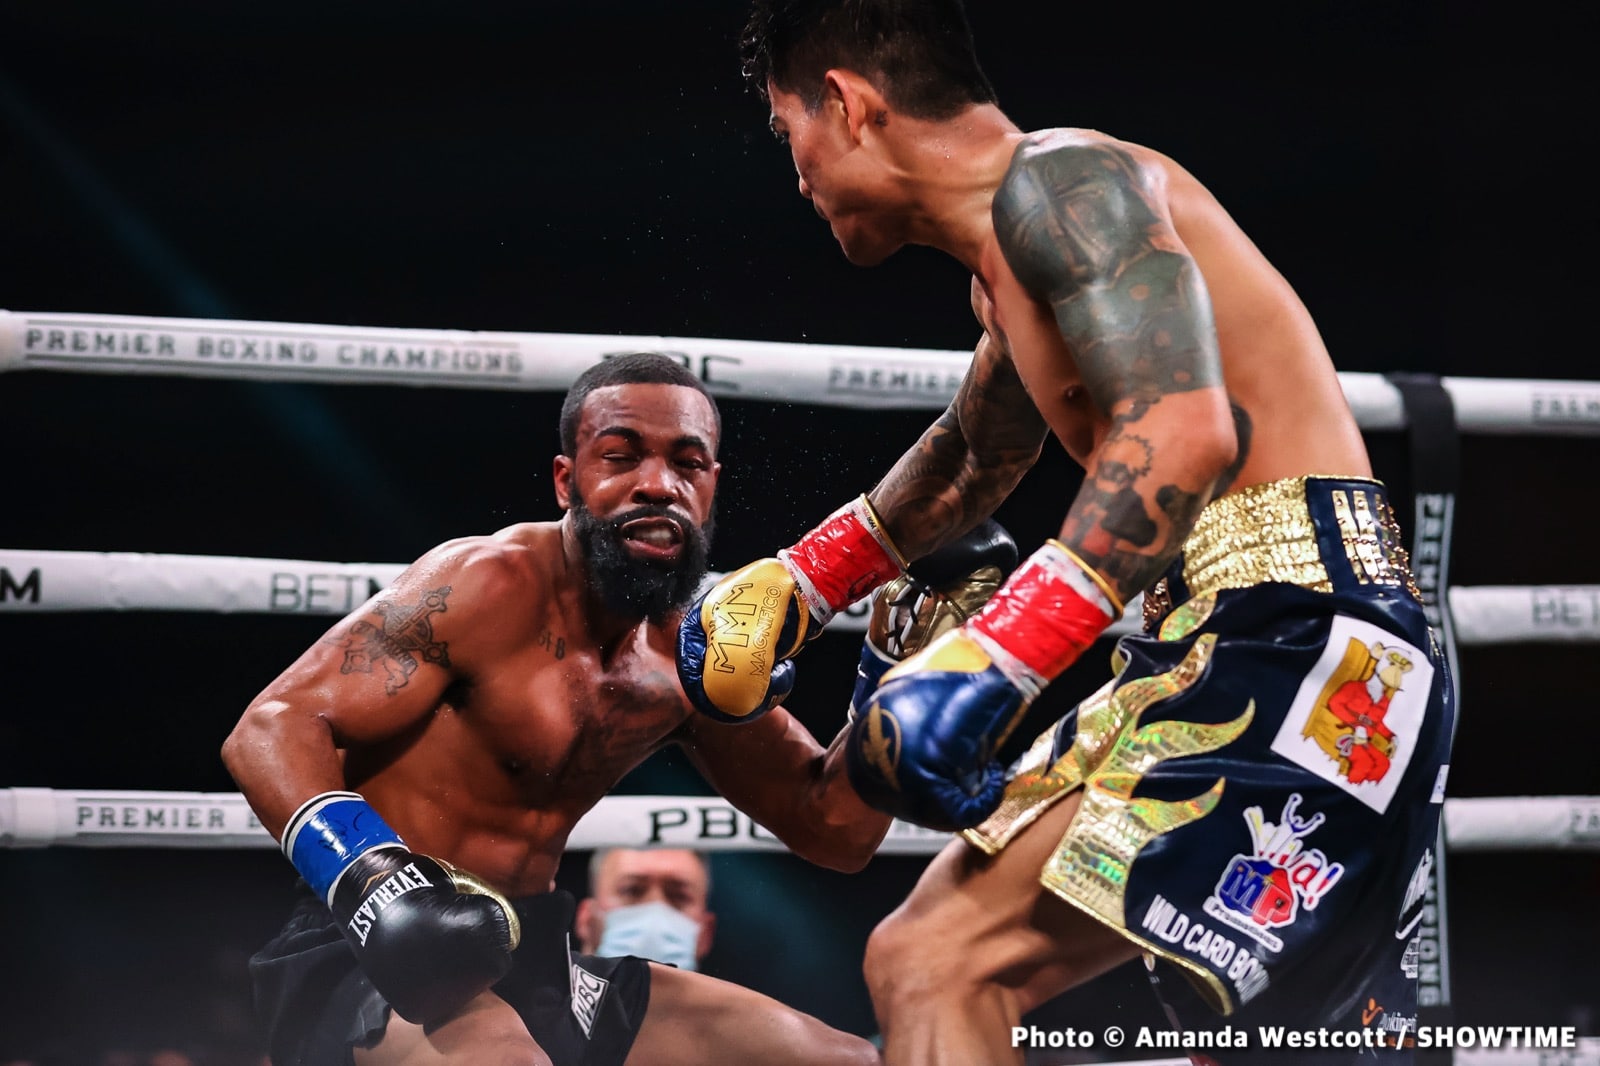 Image: Gary Russell Jr: 'I Beat' Magsayo 10 to 2, claims robbery